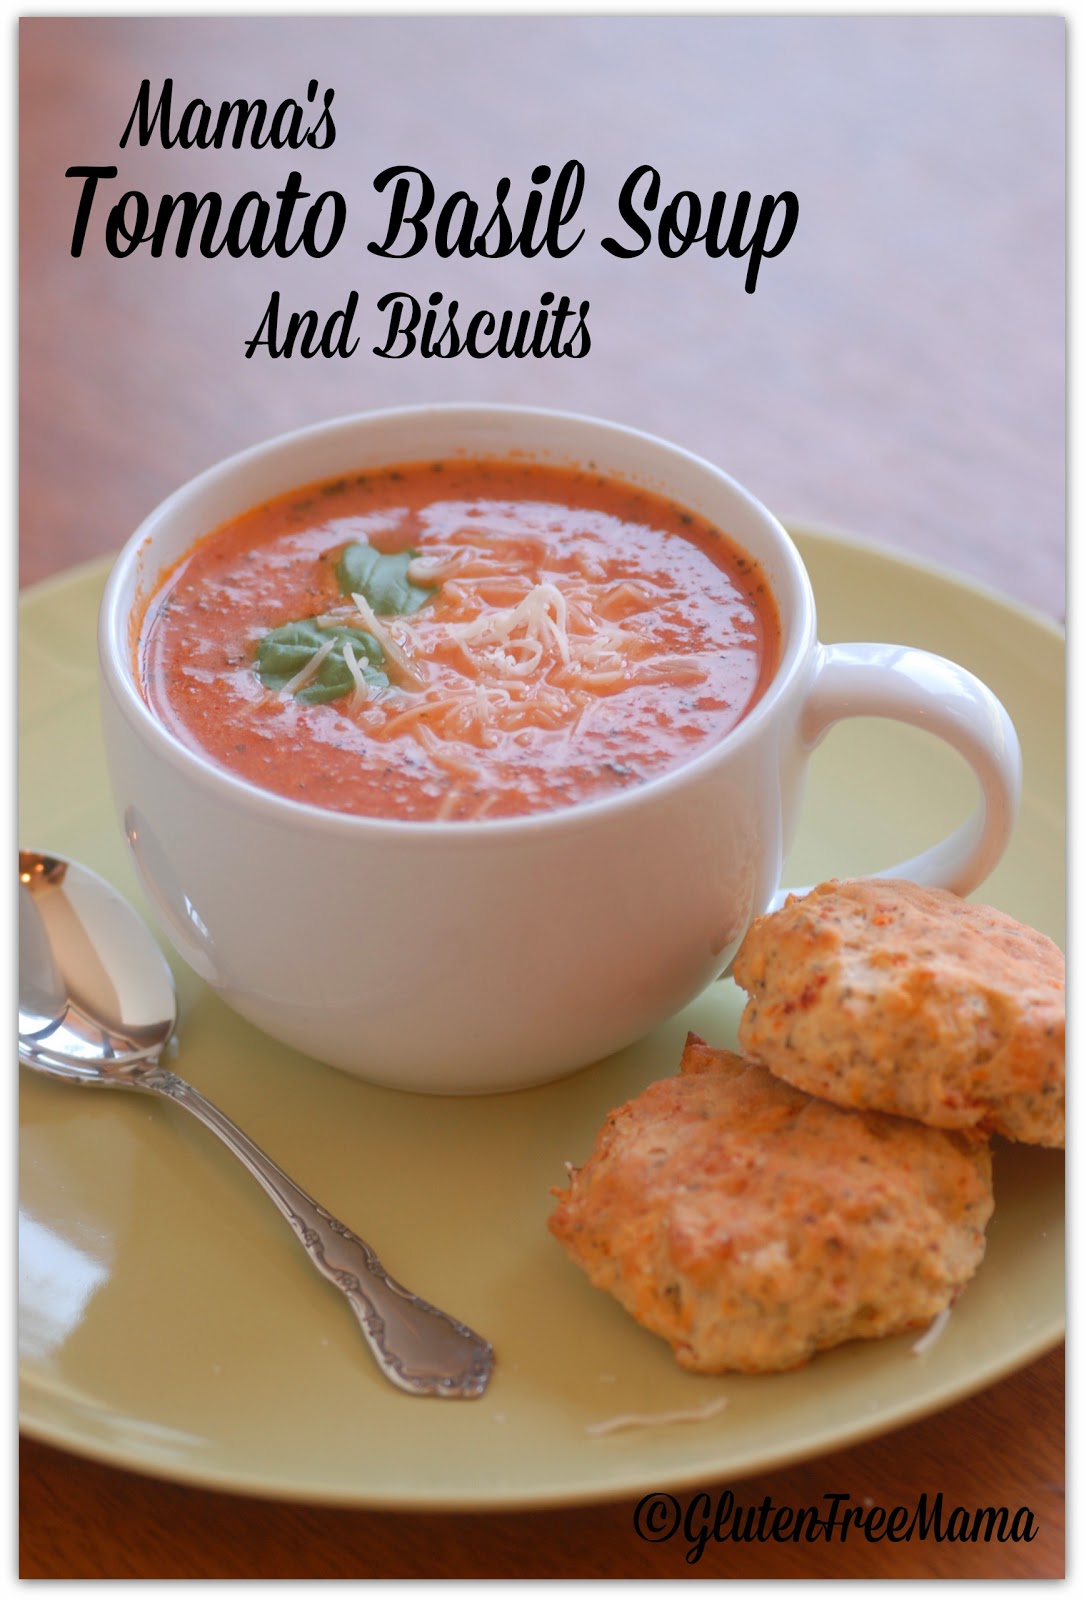 Mama’s Tomato Basil Soup and Sun-Dried Tomato Basil Biscuits